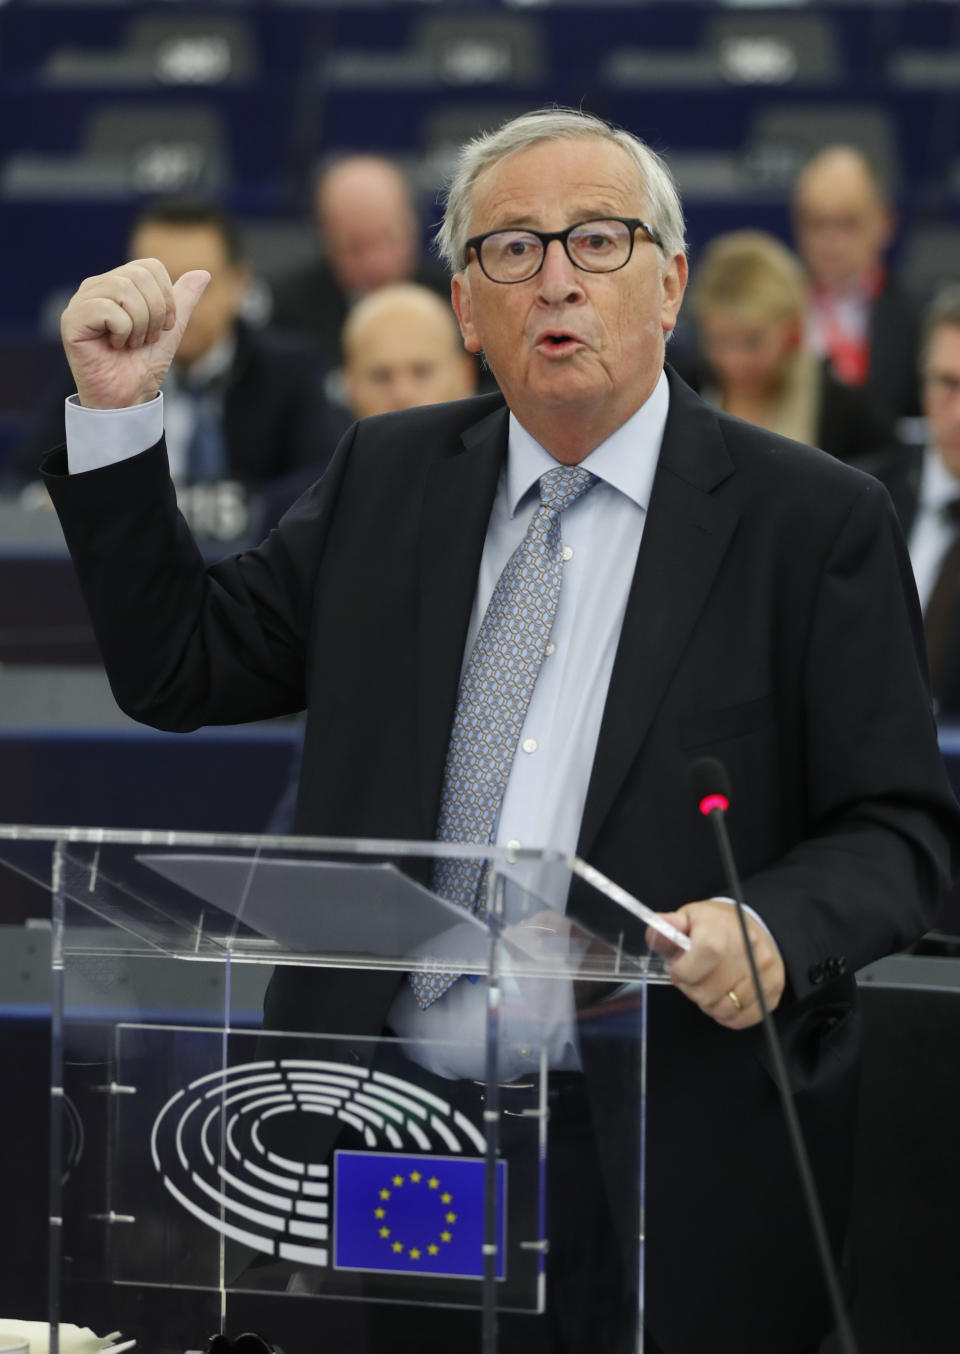 European Commission President Jean-Claude Juncker delivers his speech Wednesday, Sept. 18, 2019 in Strasbourg, eastern France. Members of the European Parliament discuss the current state of play of the UK's withdrawal from the EU. (AP Photo/Jean-Francois Badias)